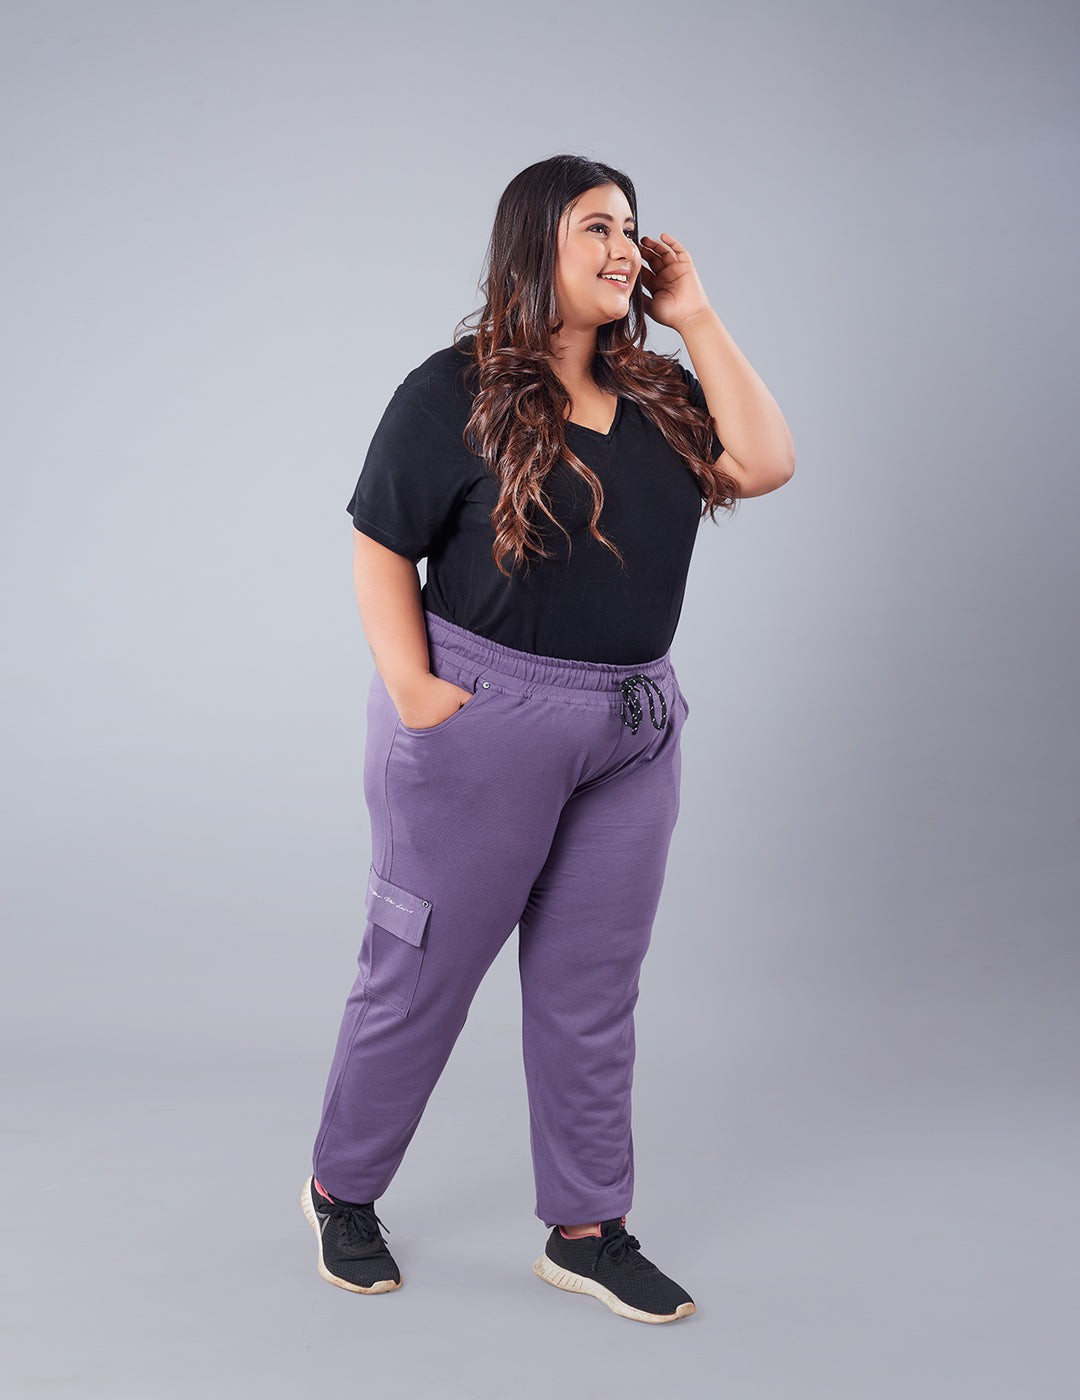 Stylish Lavender Plain Cotton Lounge Pants With 3 Pockets For women Online In India